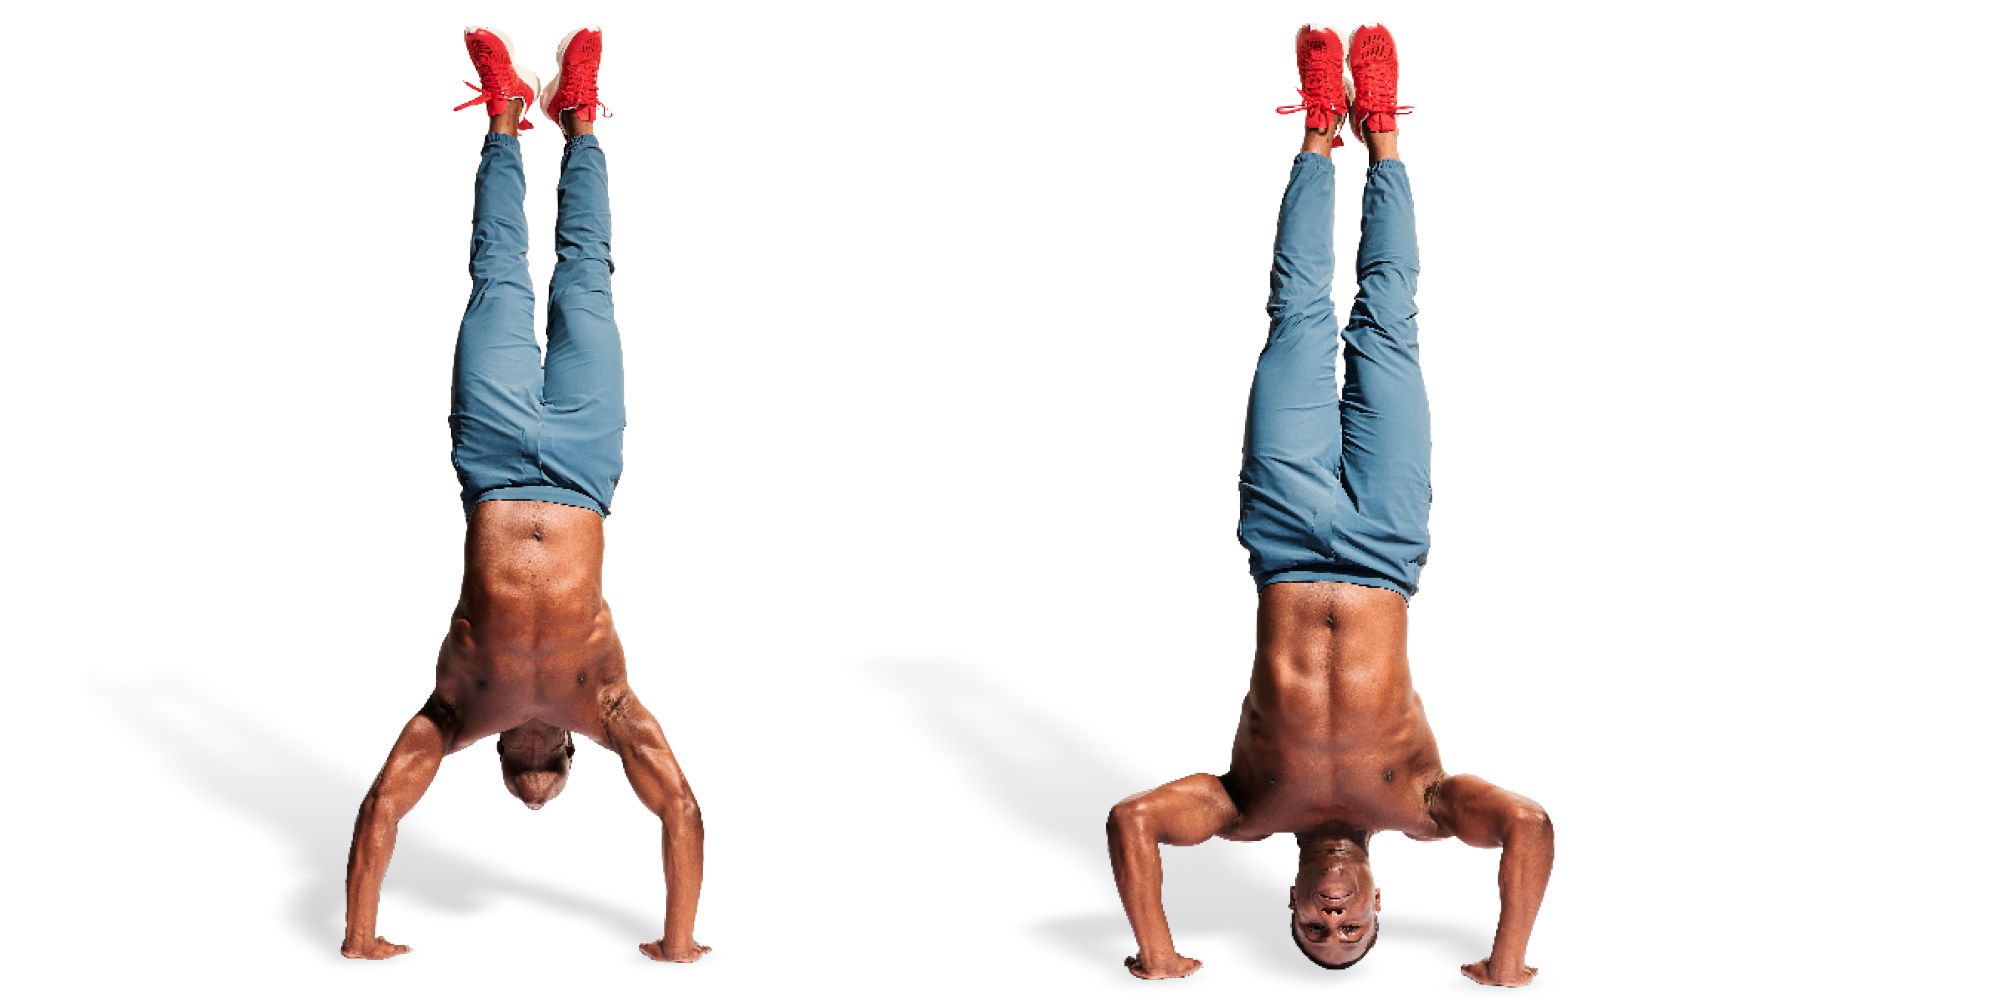 The UK's fittest man's guide to perfecting the strict handstand push-up